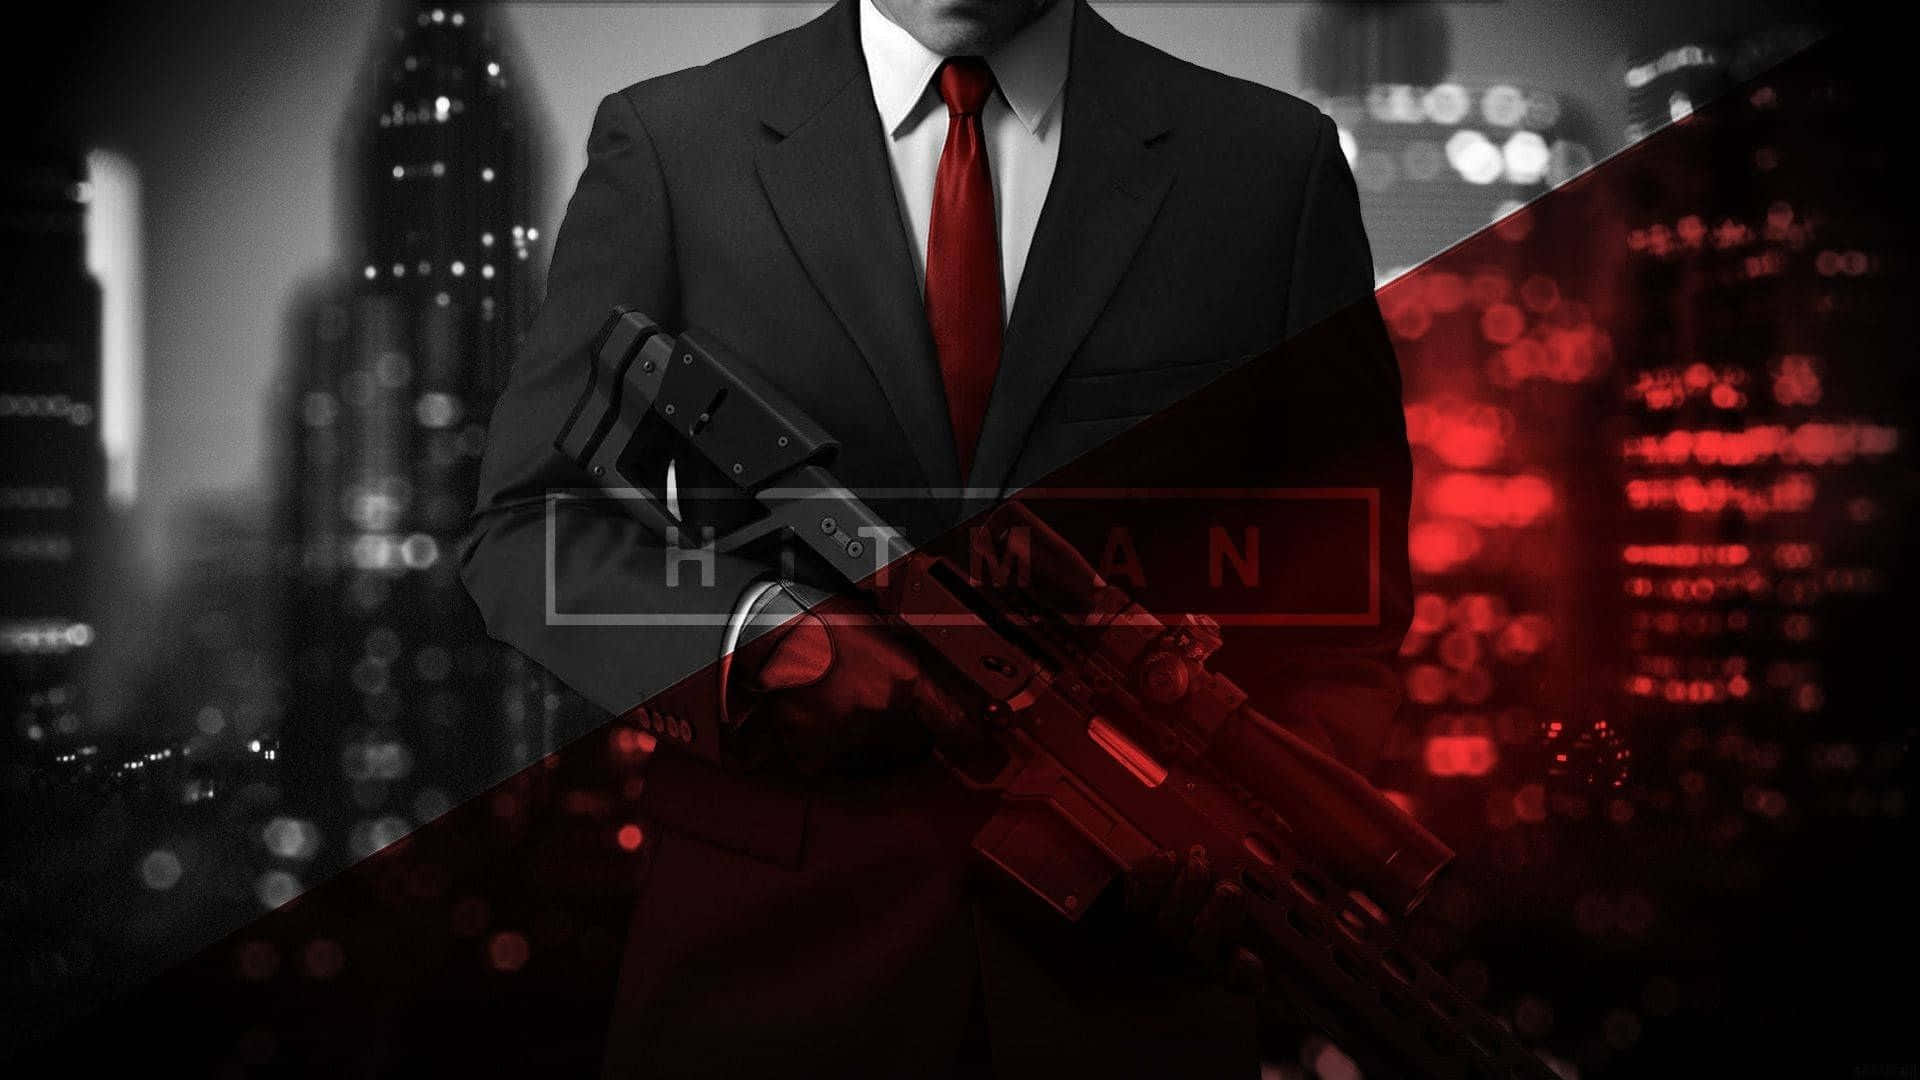 A Man In A Suit Holding A Gun In Front Of A City